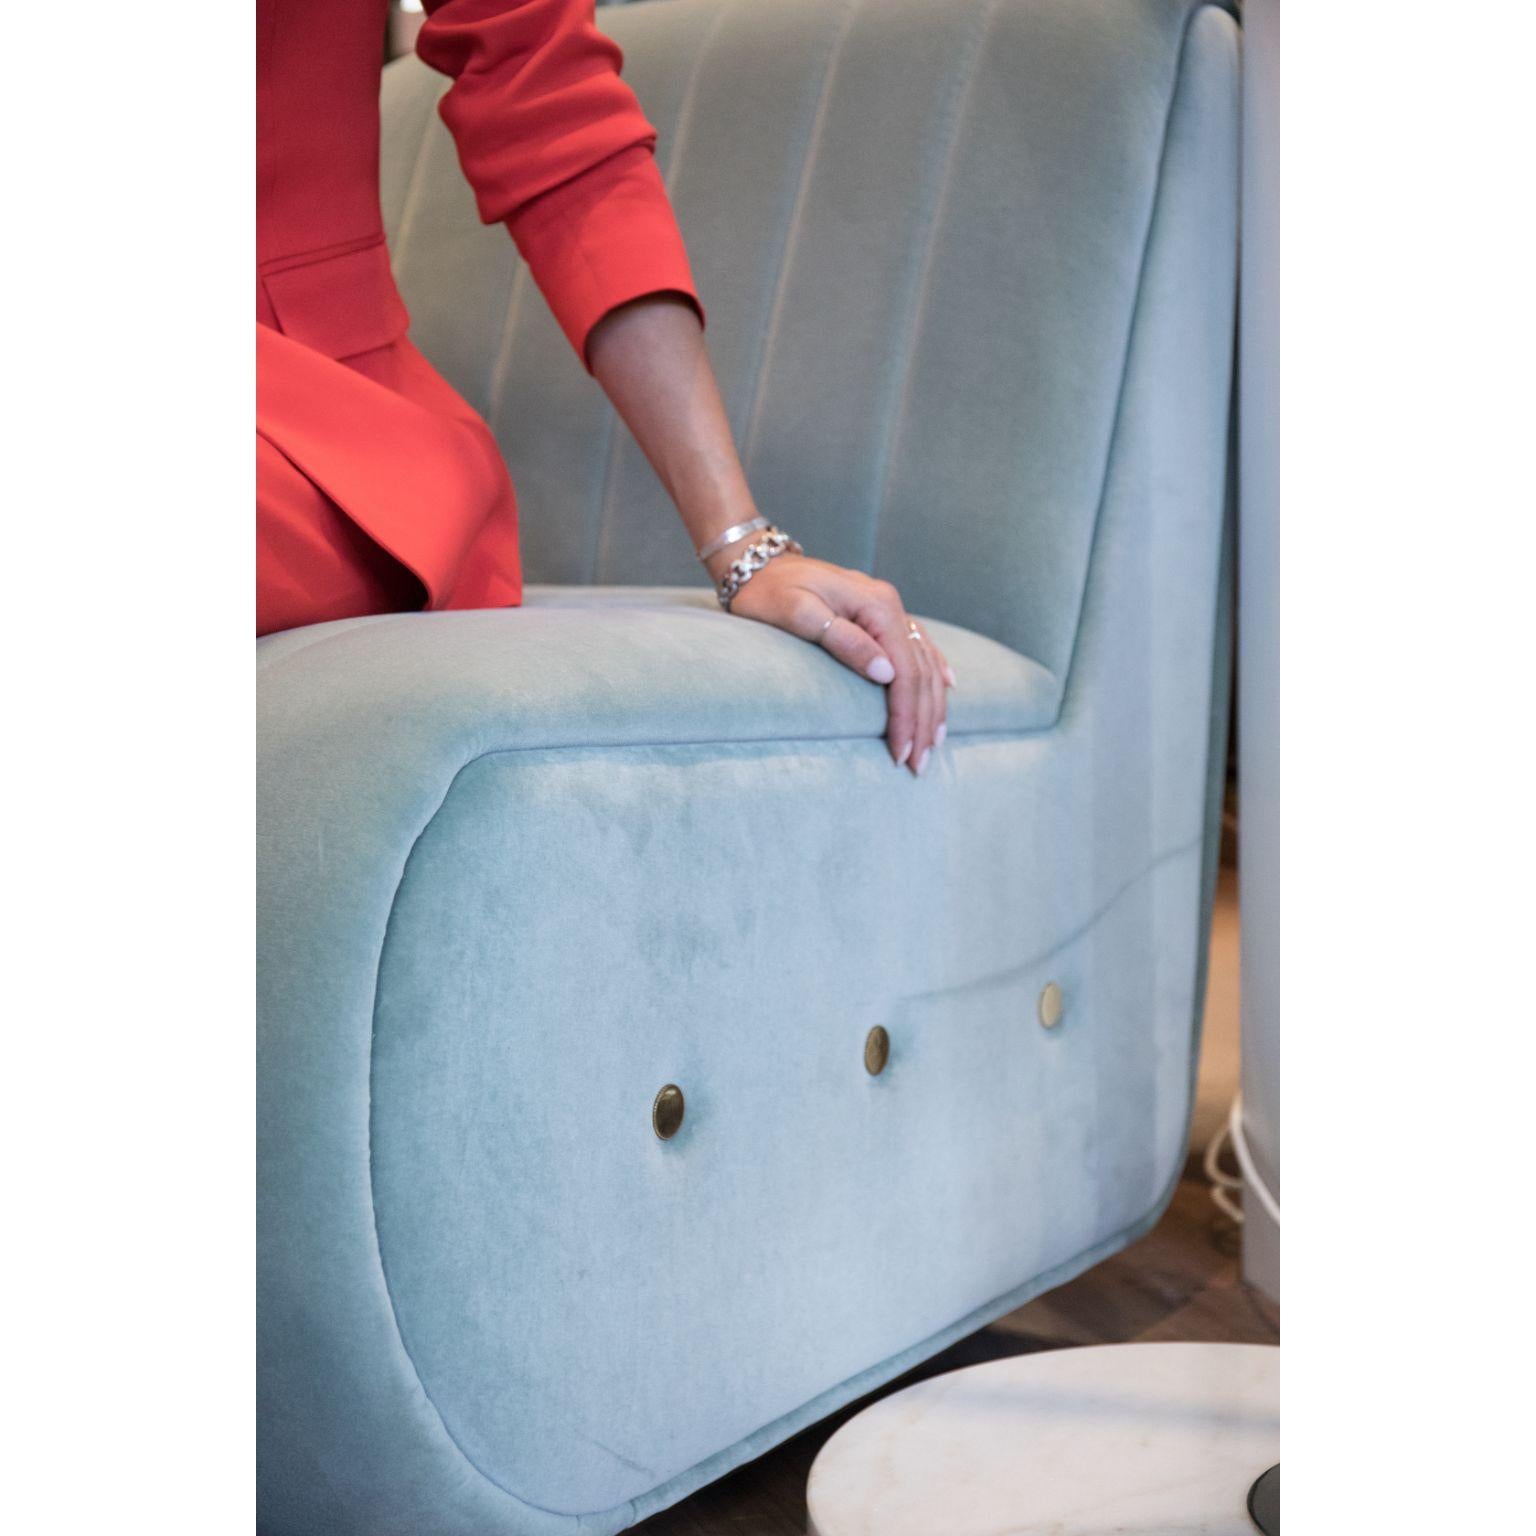 Sophia is a particular bench seat sofa that draws inspiration from the aesthetics of Mid-century Modern Design. It is upholstered in velvet and stitched from the top to the bottom. The base is made of gold plated brass and it has button tufted